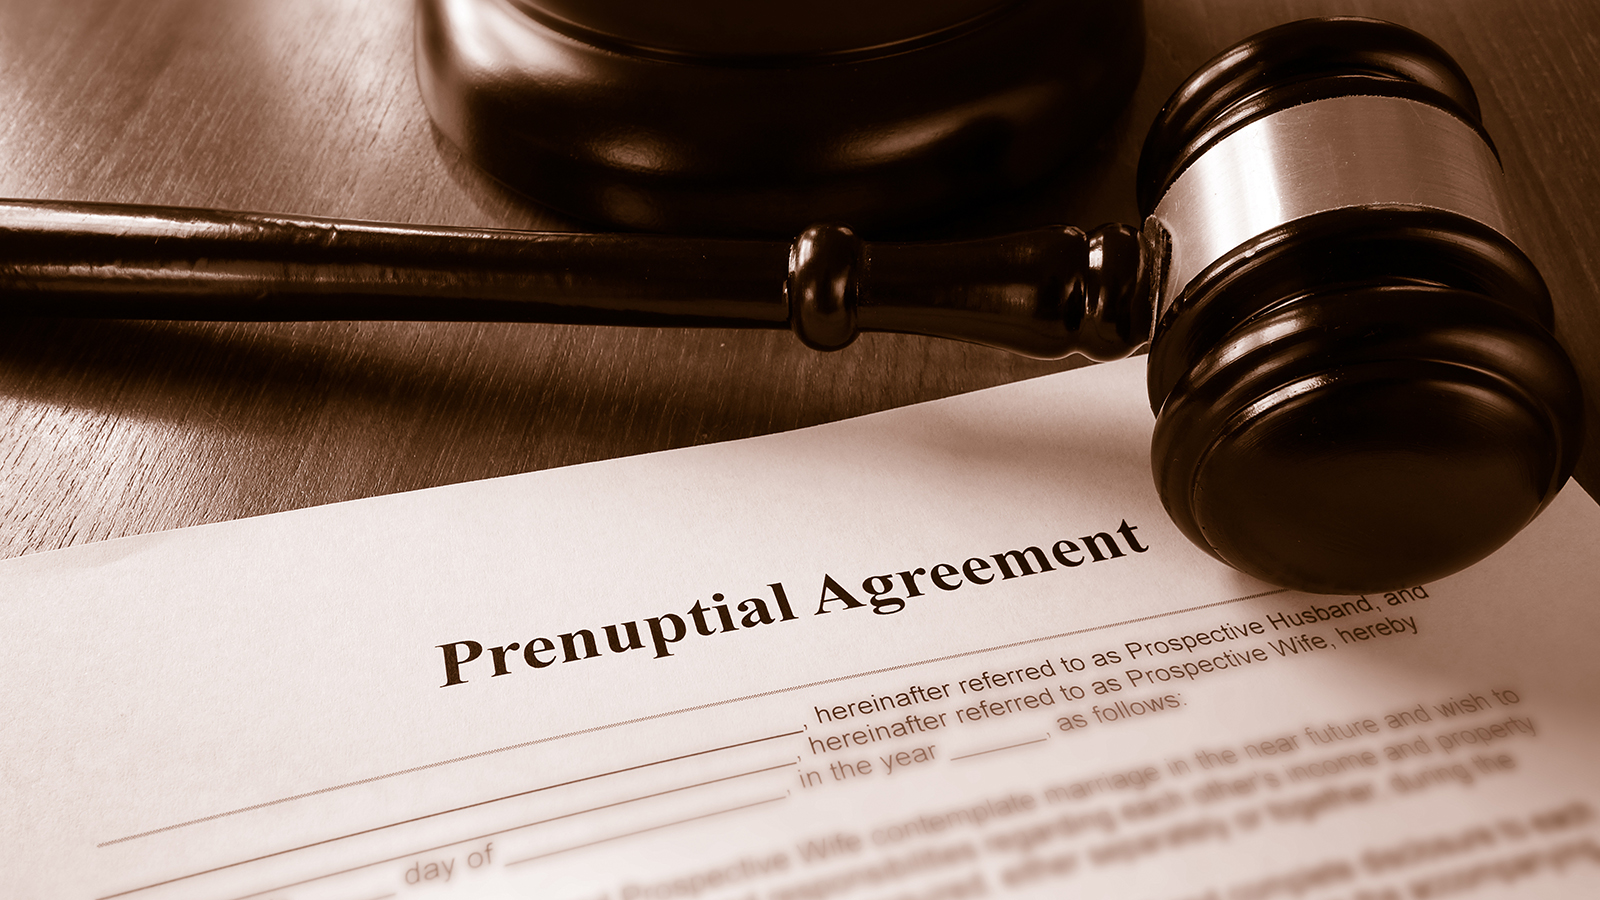 Prenuptial marriage agreement with a gavel